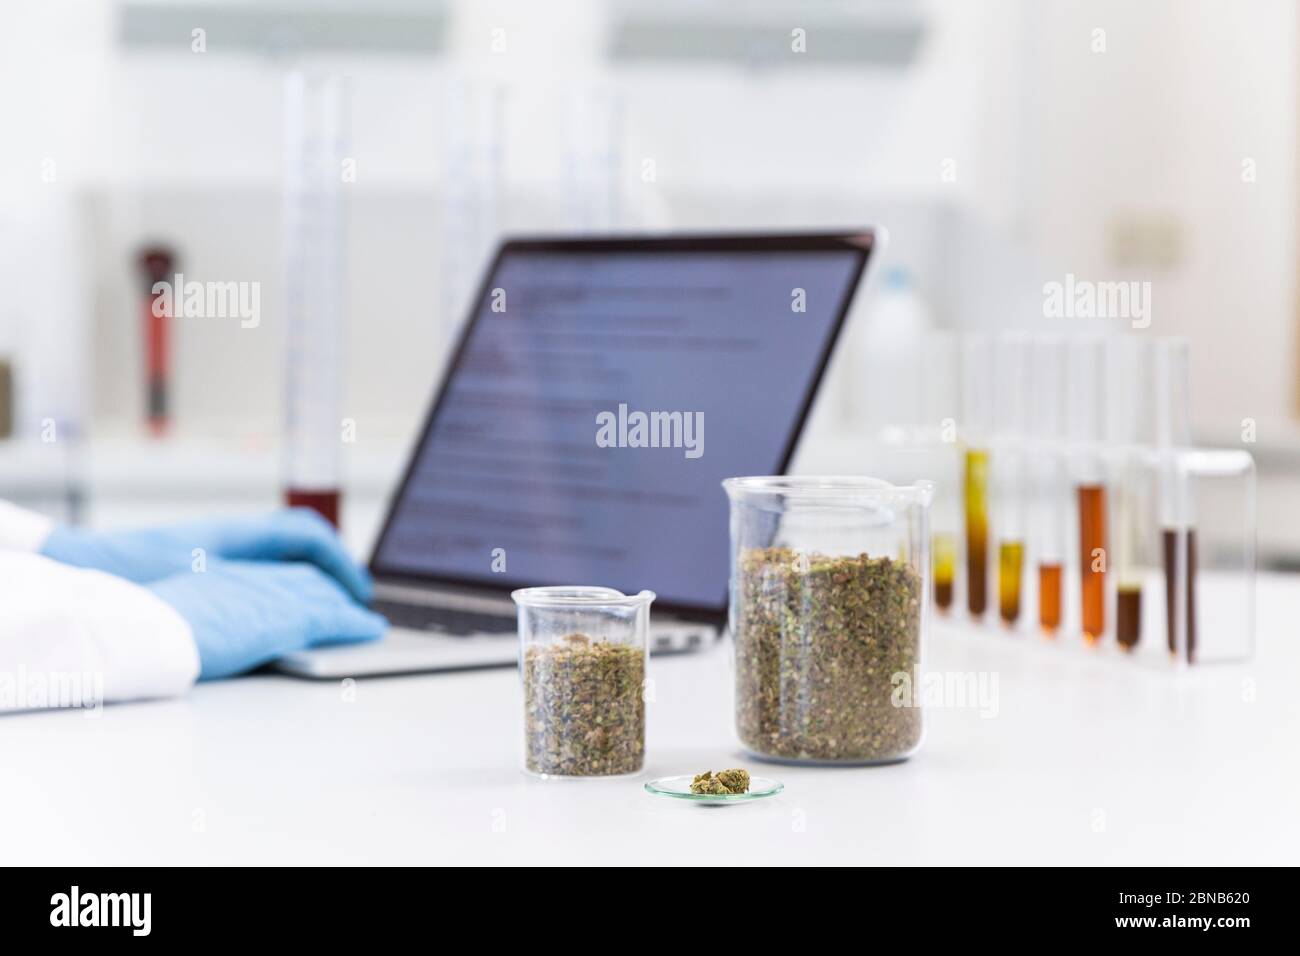 Hemp bud and marijuana seeds in front of chemical scientist working on laptop. Glass tubes with CBD and CBDa oils are on table. Cannabis pharmaceutica Stock Photo